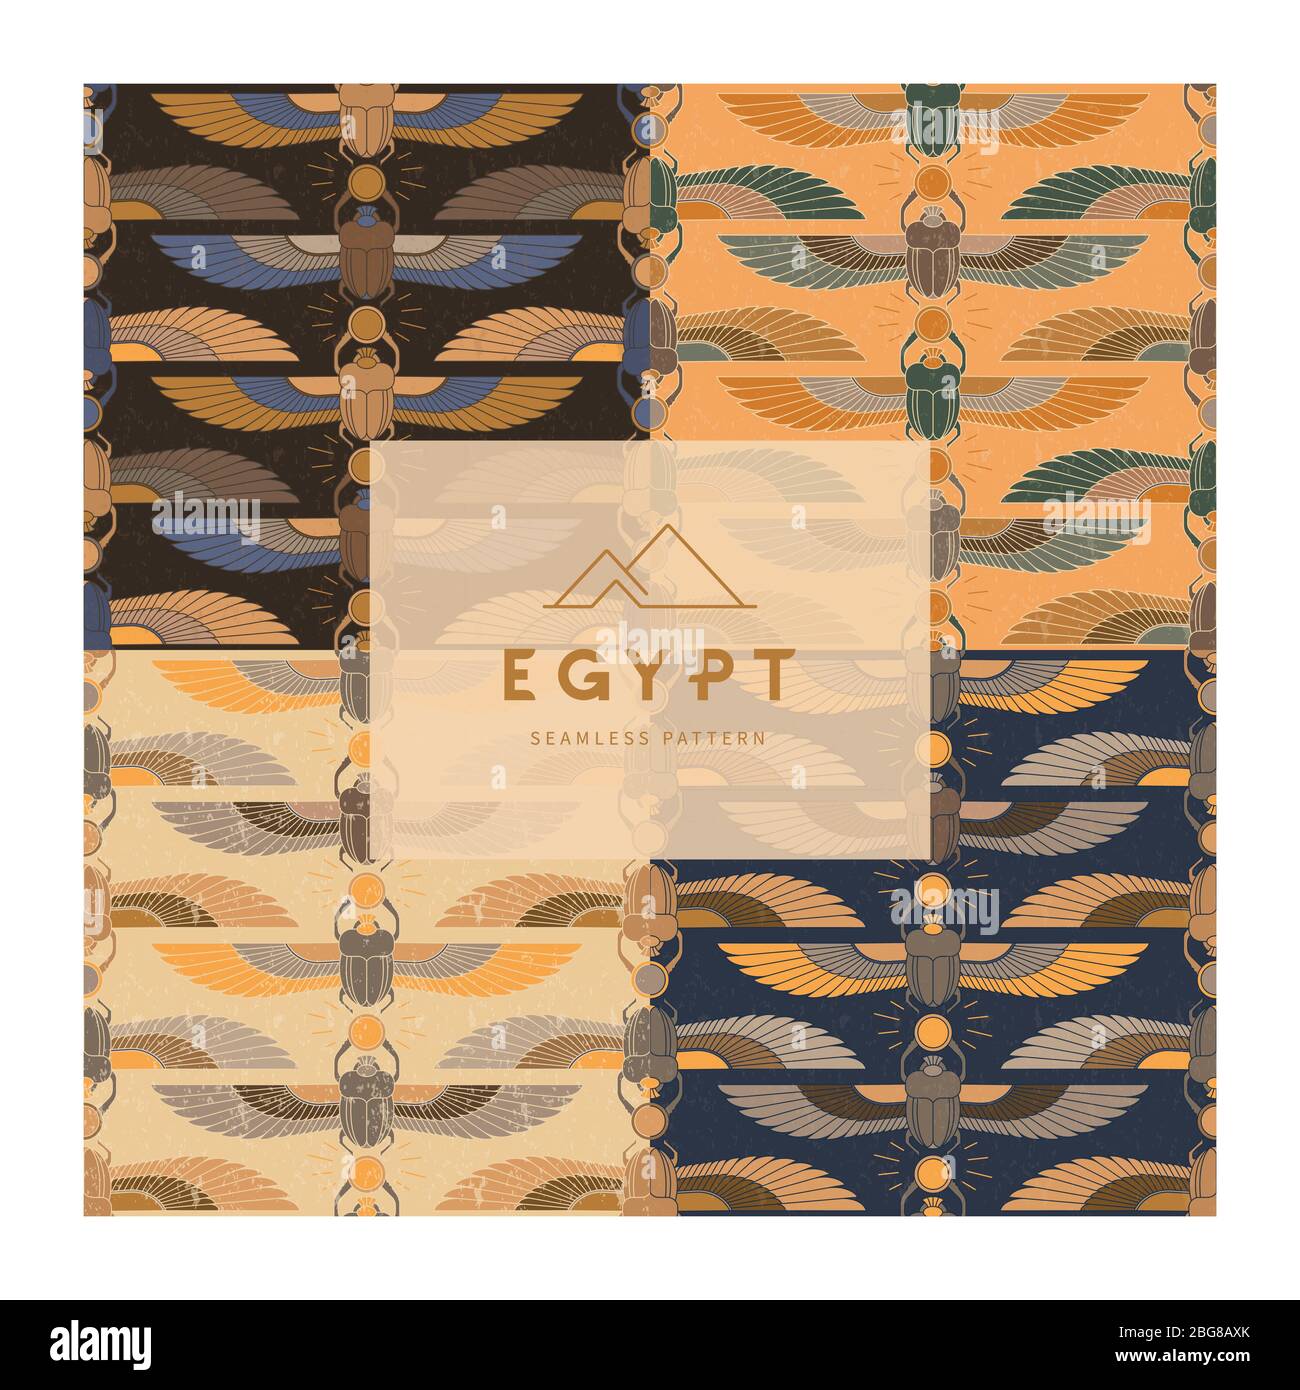 Symbols of ancient Egypt in the form of a patterns collections with an illustration of a scarab beetle with a sun symbol in its paws and wings. Stock Vector